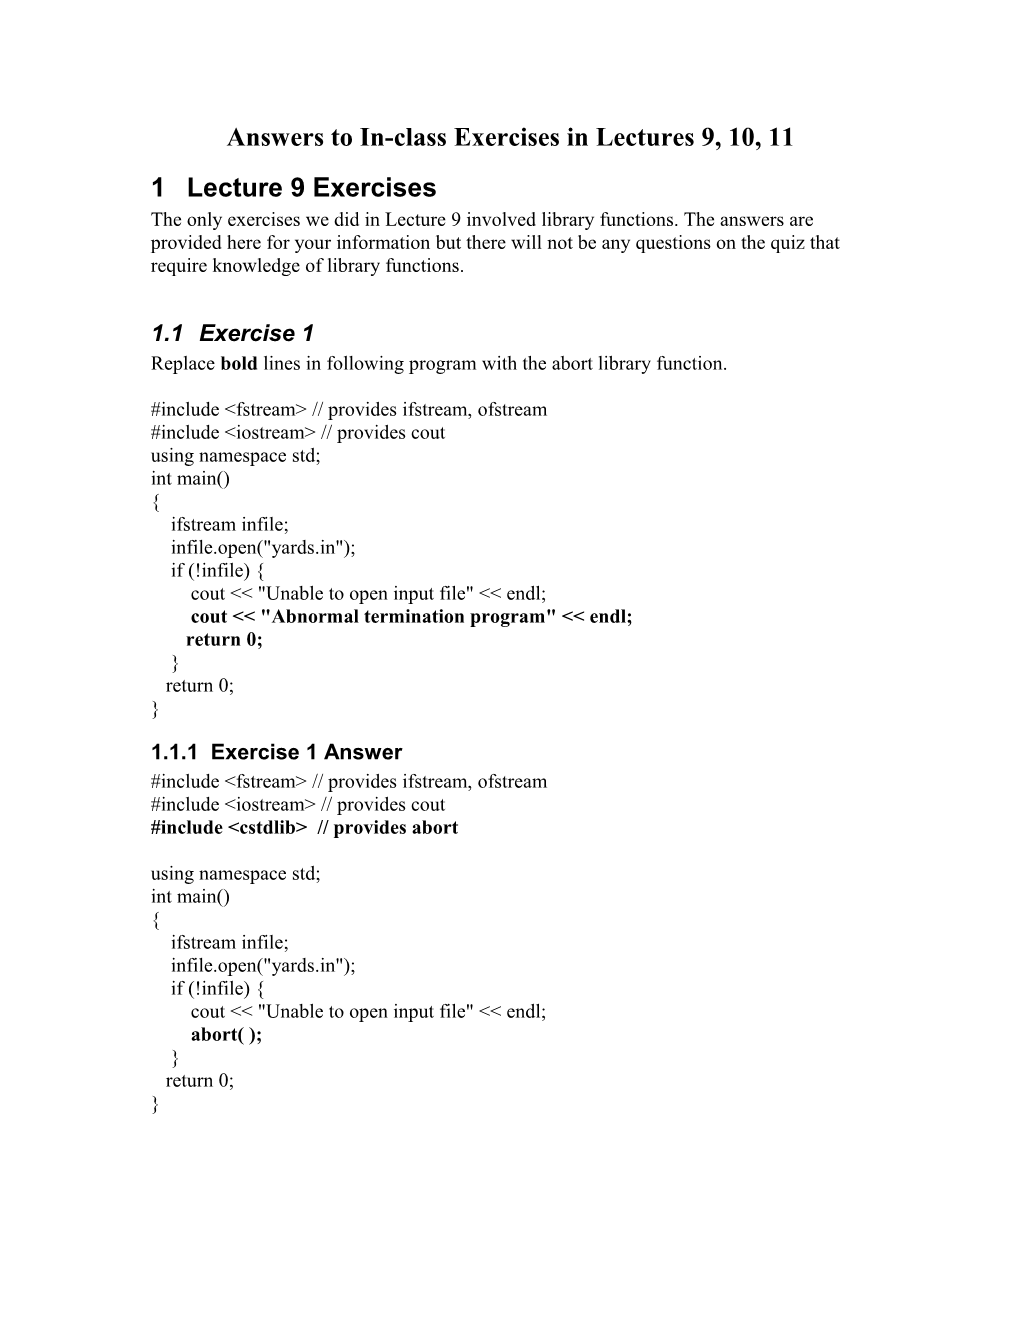 Answers to In-Class Exercises in Lectures 9, 10, 11